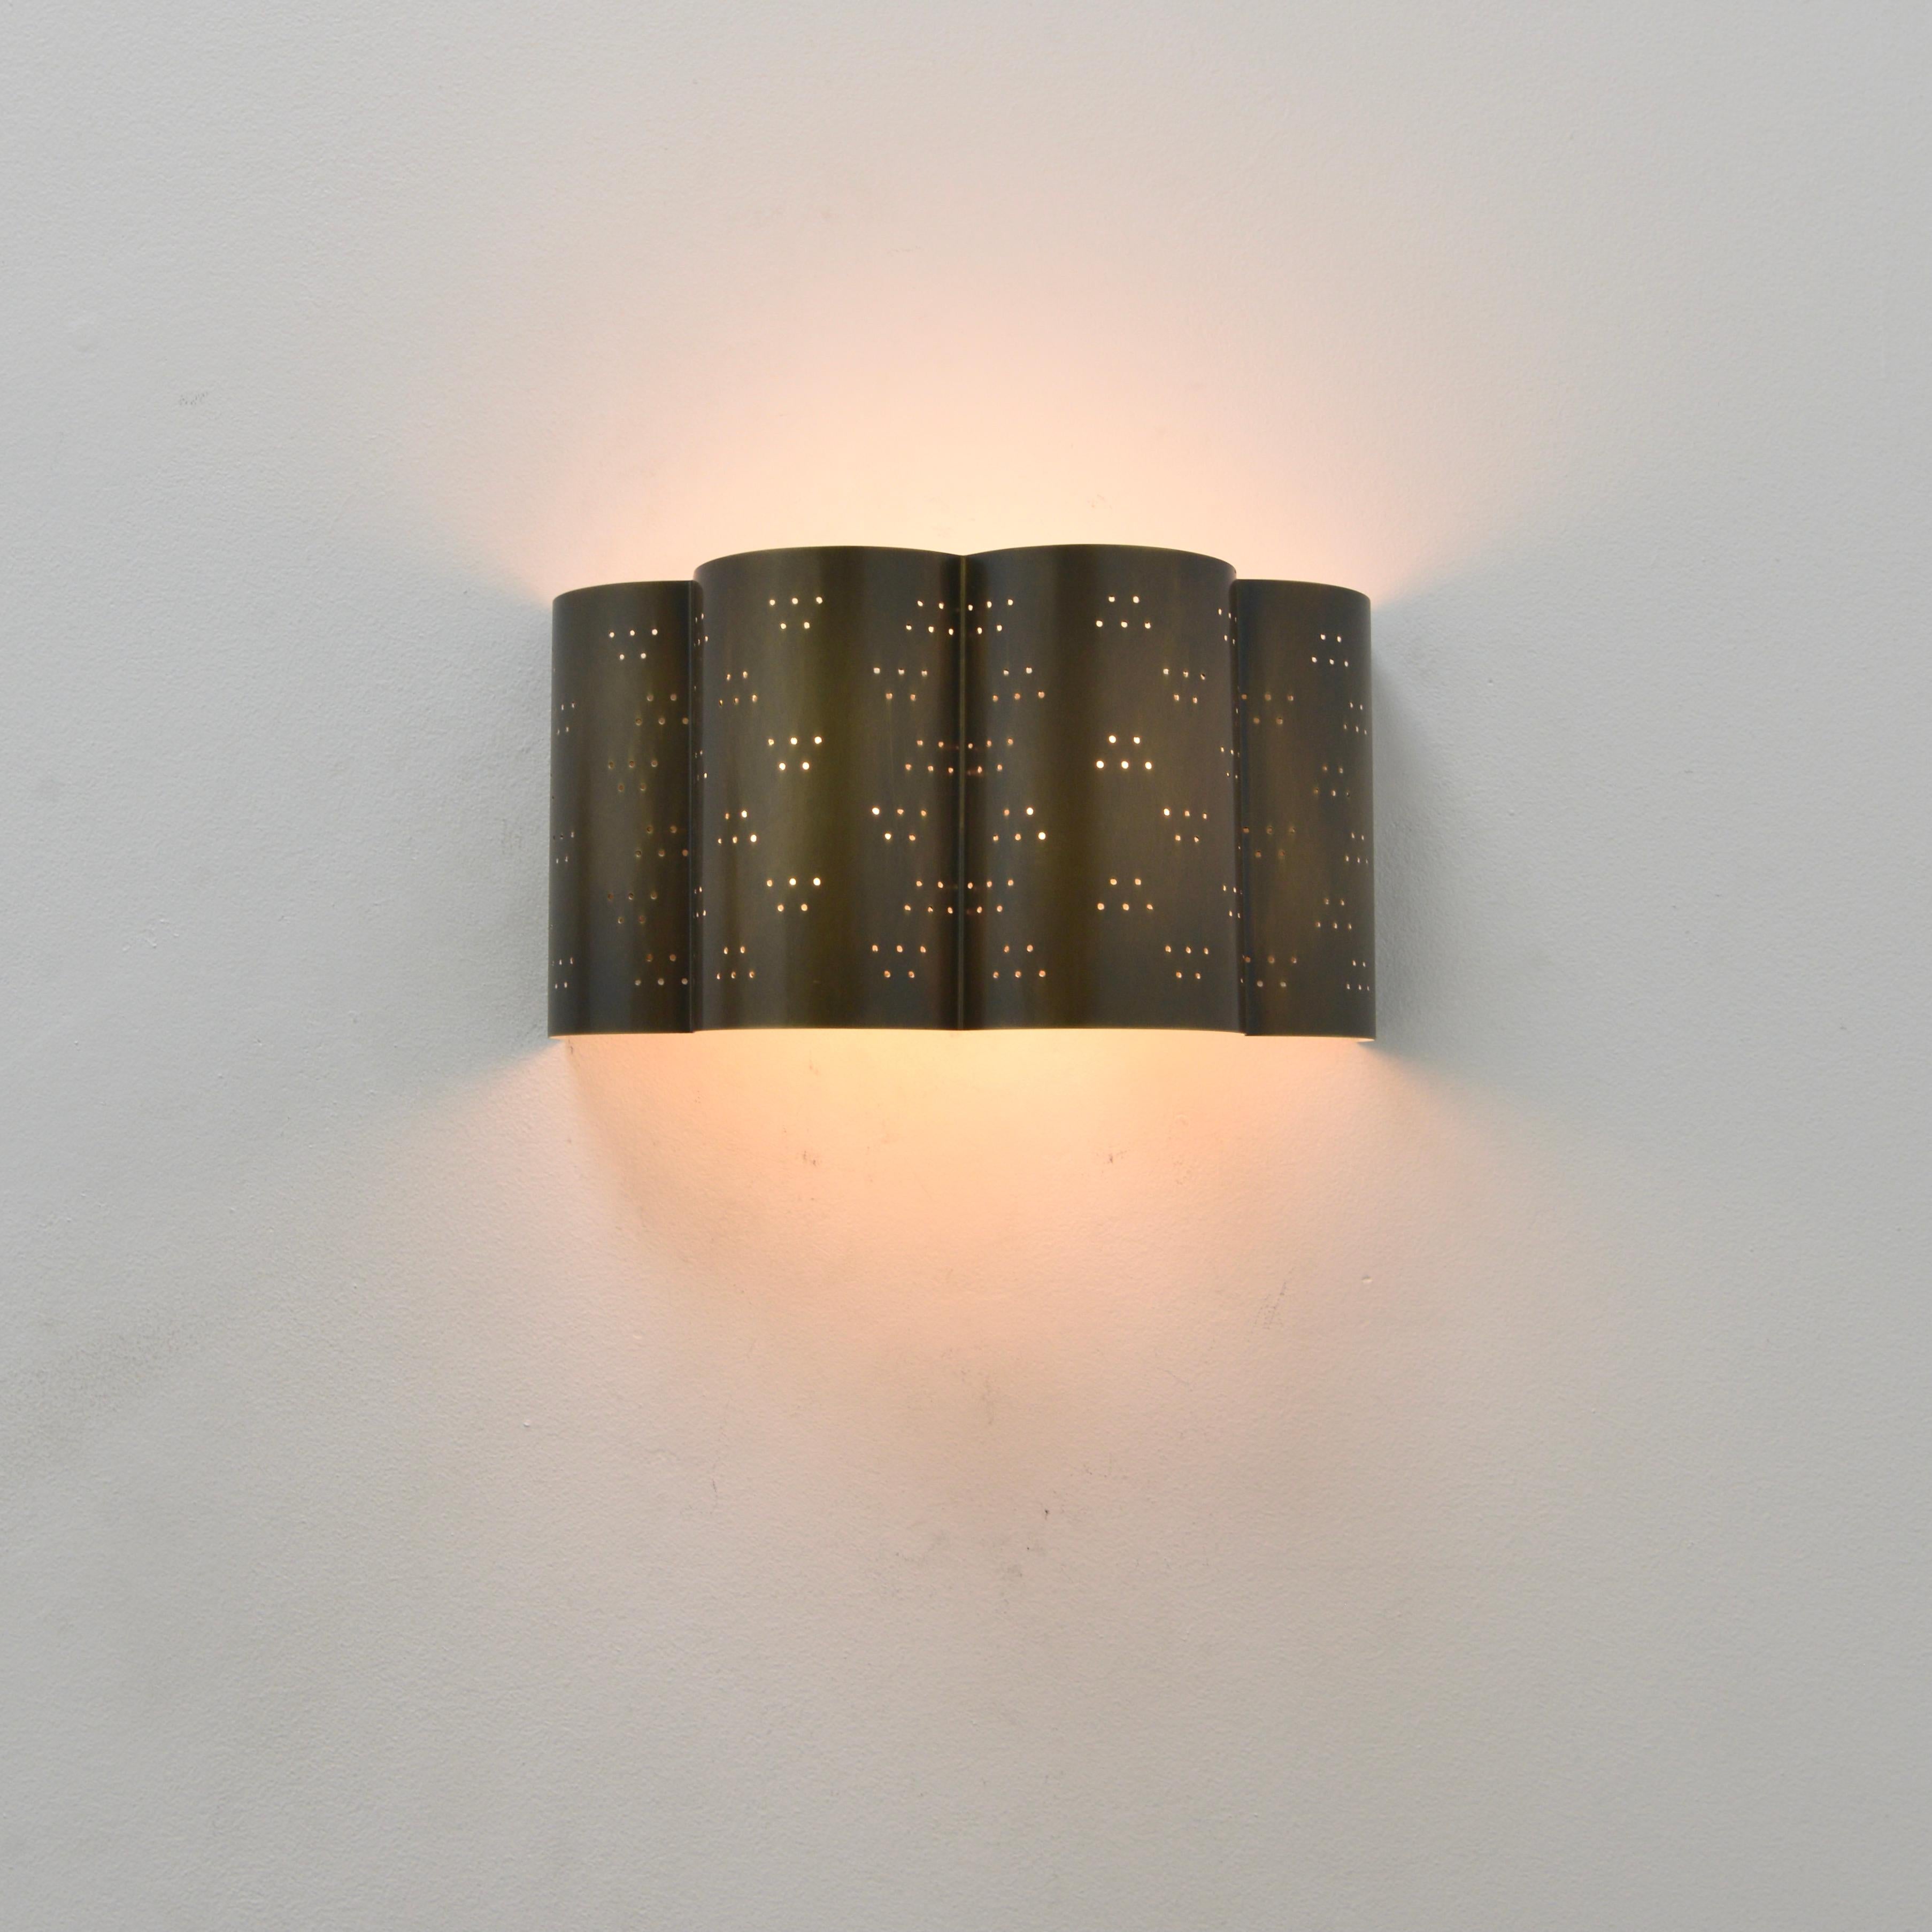 Stunning LUcloud sconce. An all brass patinated and perforated wall sconce by Lumfardo Luminaires. Made contemporary in the US. Multiples available for order. Can be wired for use anywhere in the world. (2) E26 medium based lightbulbs included with